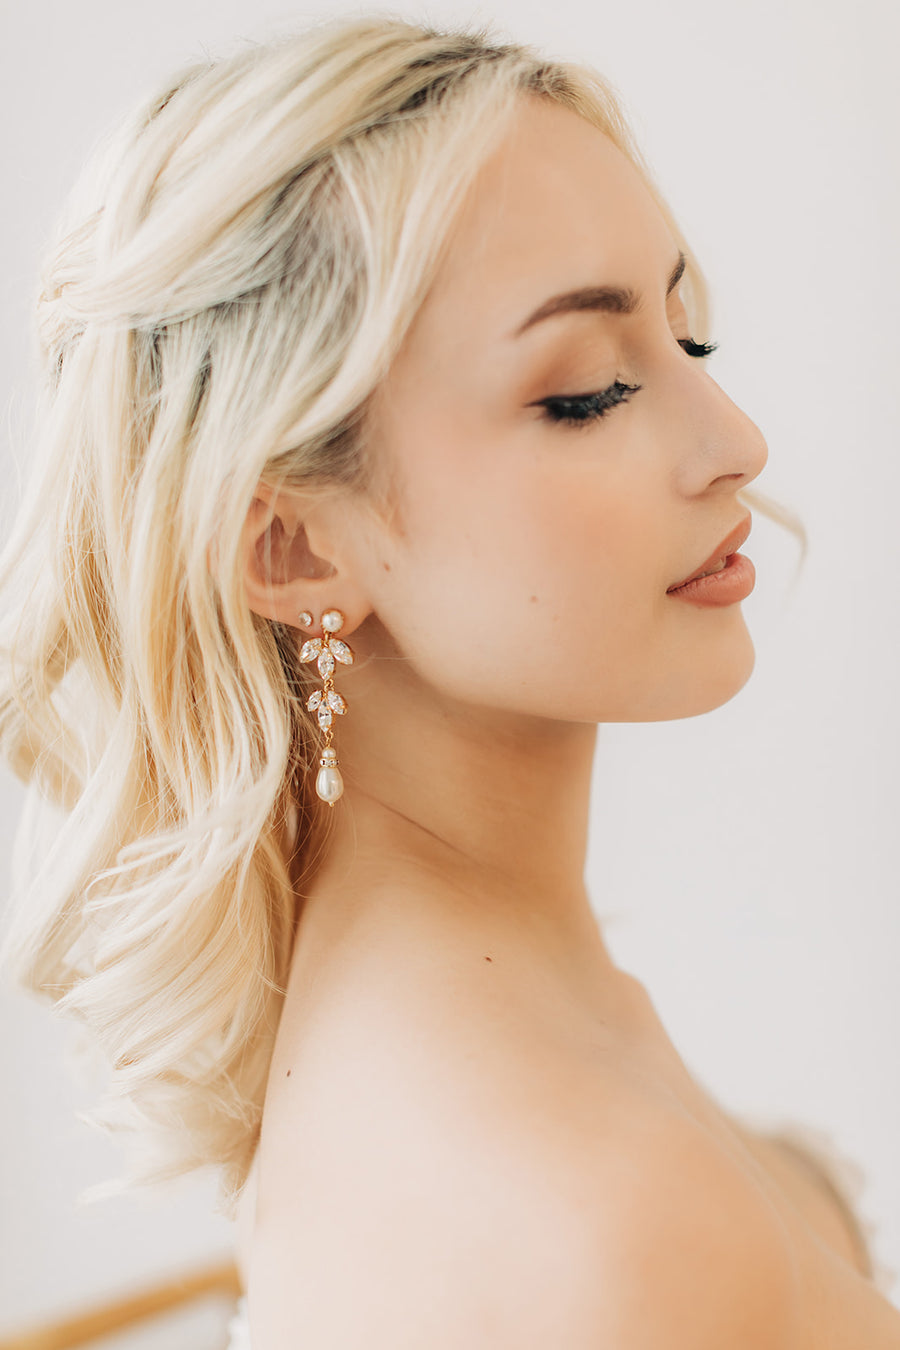  A bride with long blonde hair wearing a Swarovski Crystal and Pearl Bridal Statement Earring by Joanna Bisley Designs. 